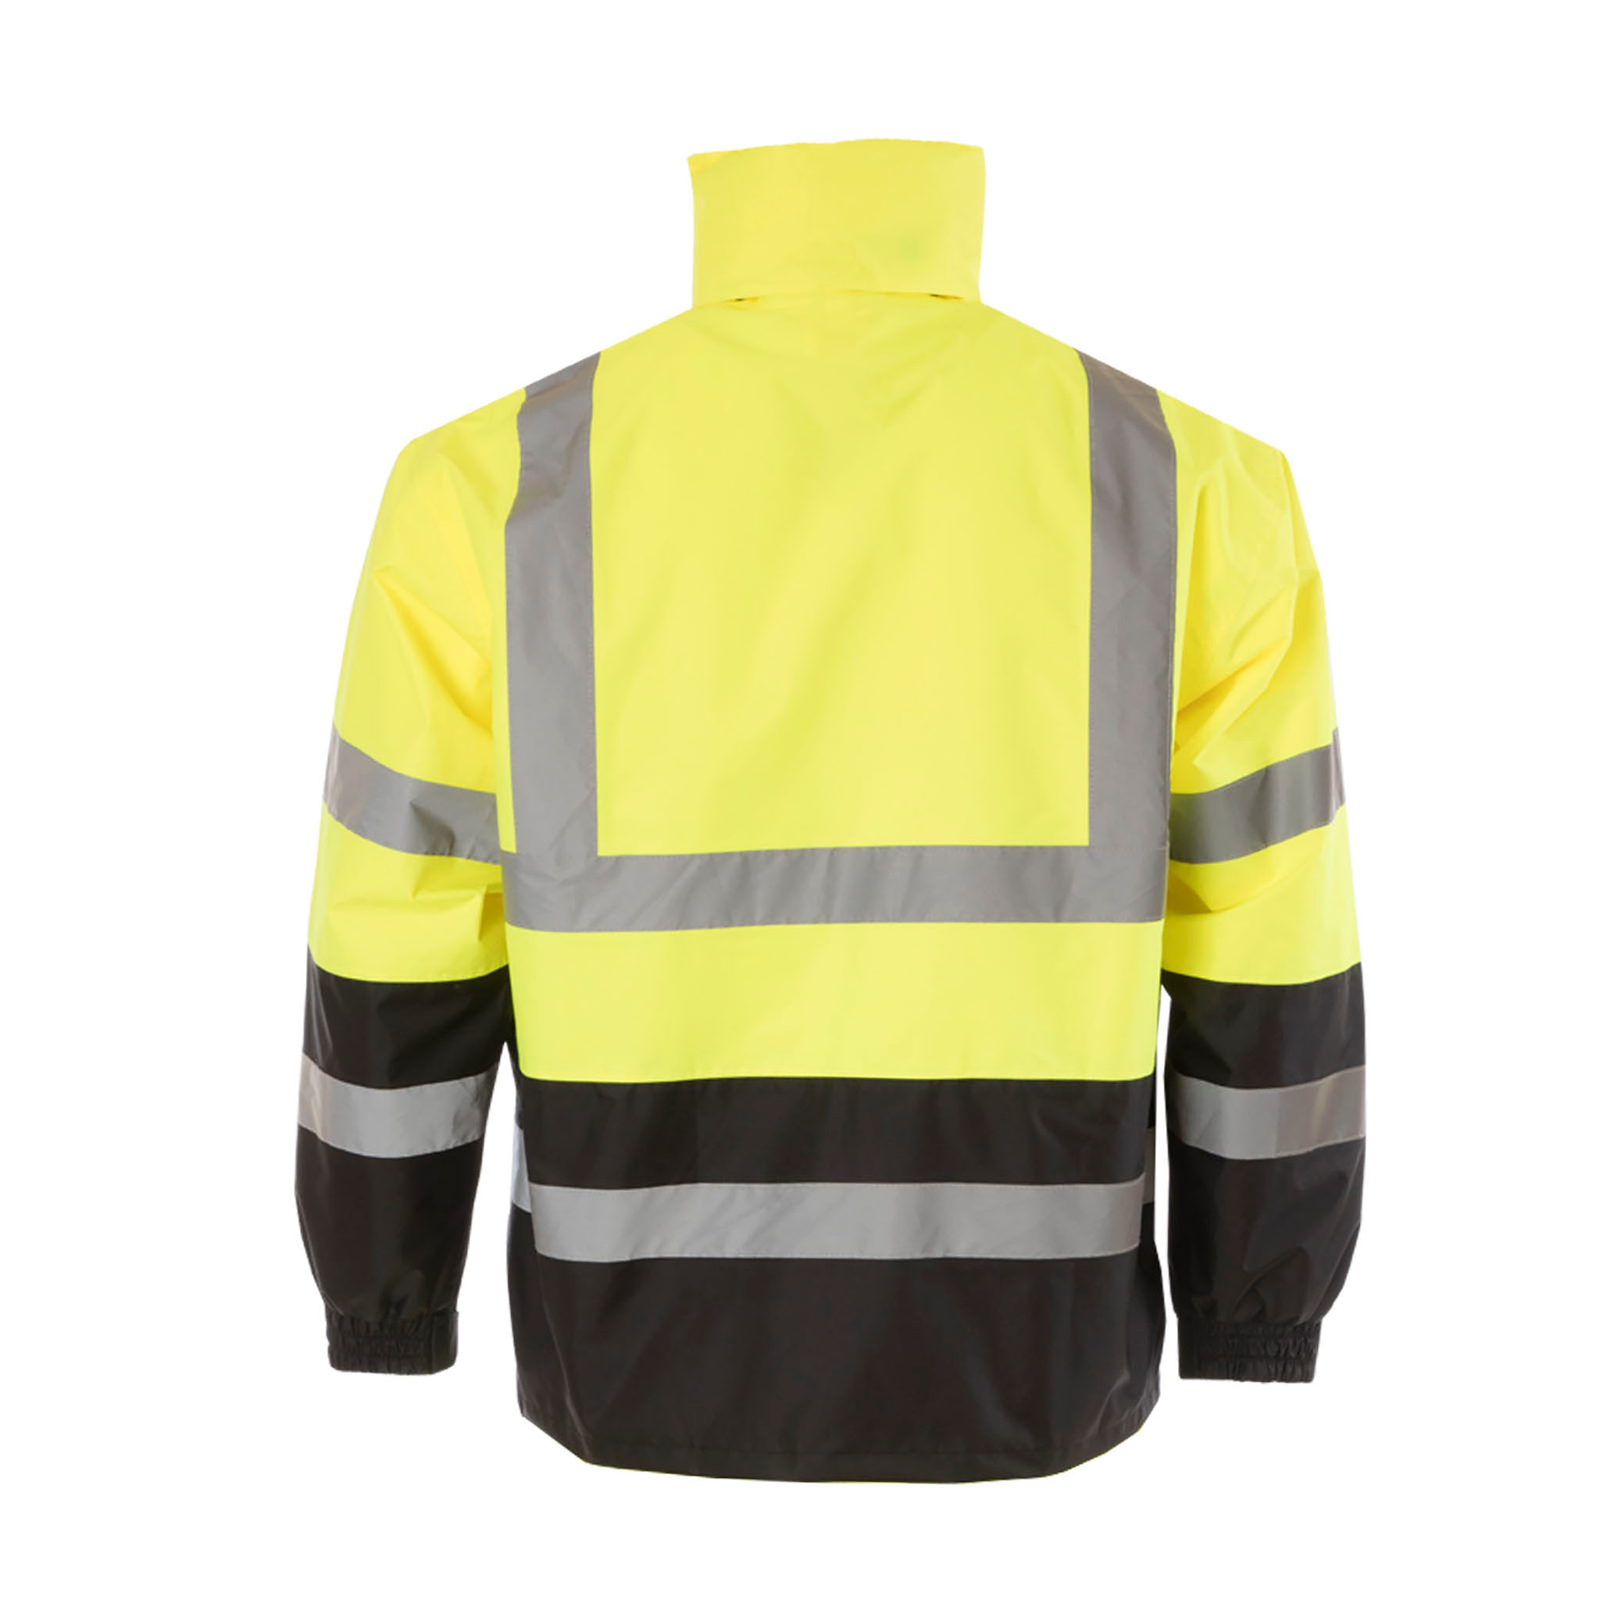 Back view of a JORESTECH High visibility yellow and black rain jacket class 3 type R with 2 inches reflective strips